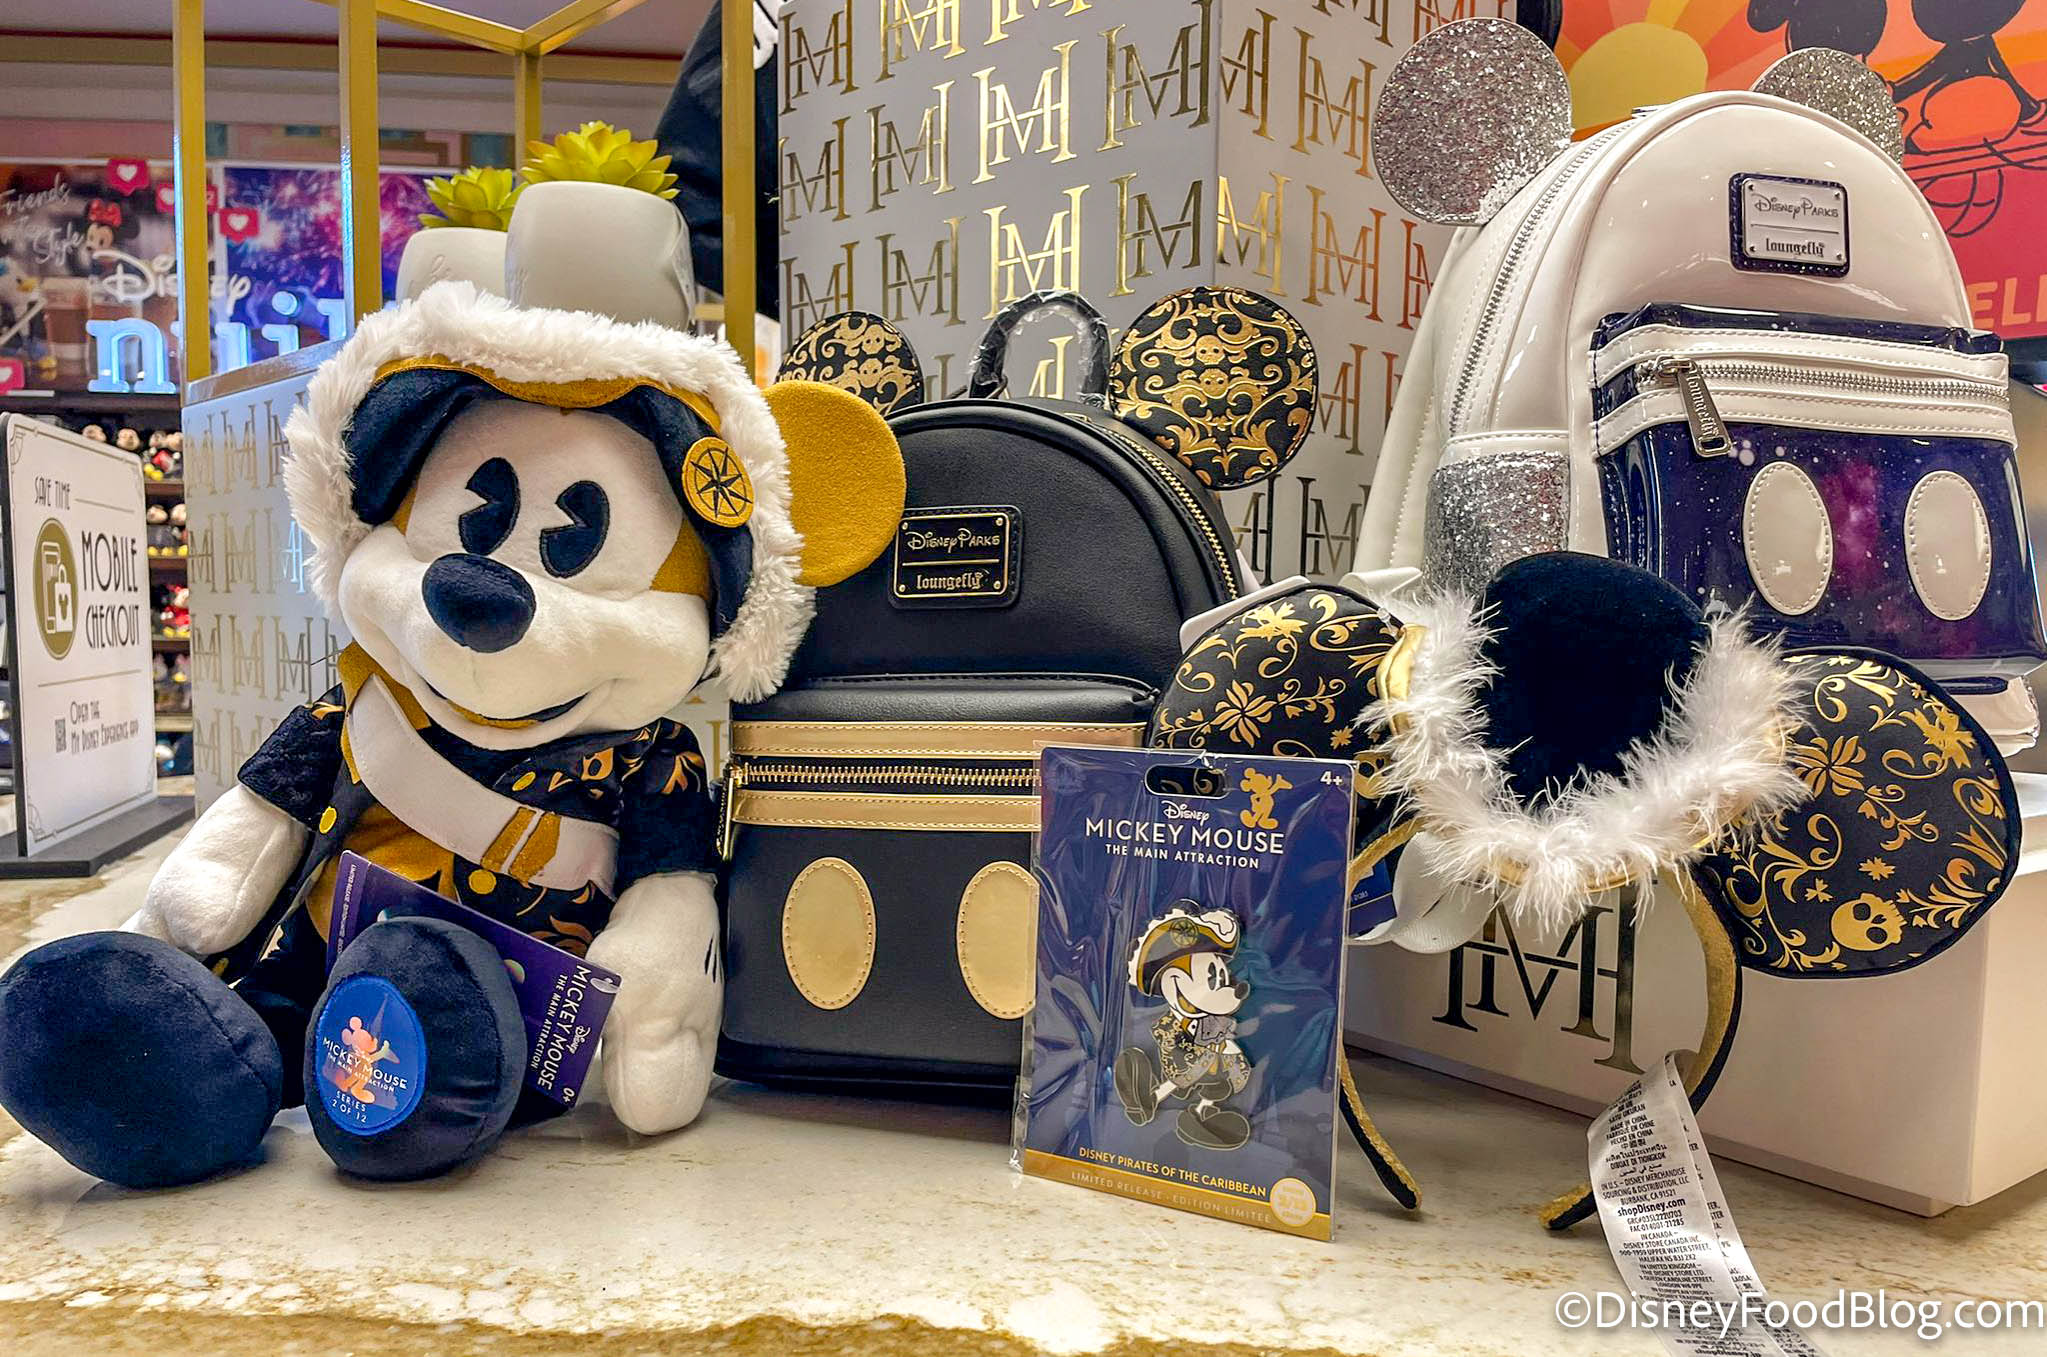 New Pirates of the Caribbean Purse and Socks Featuring Mickey